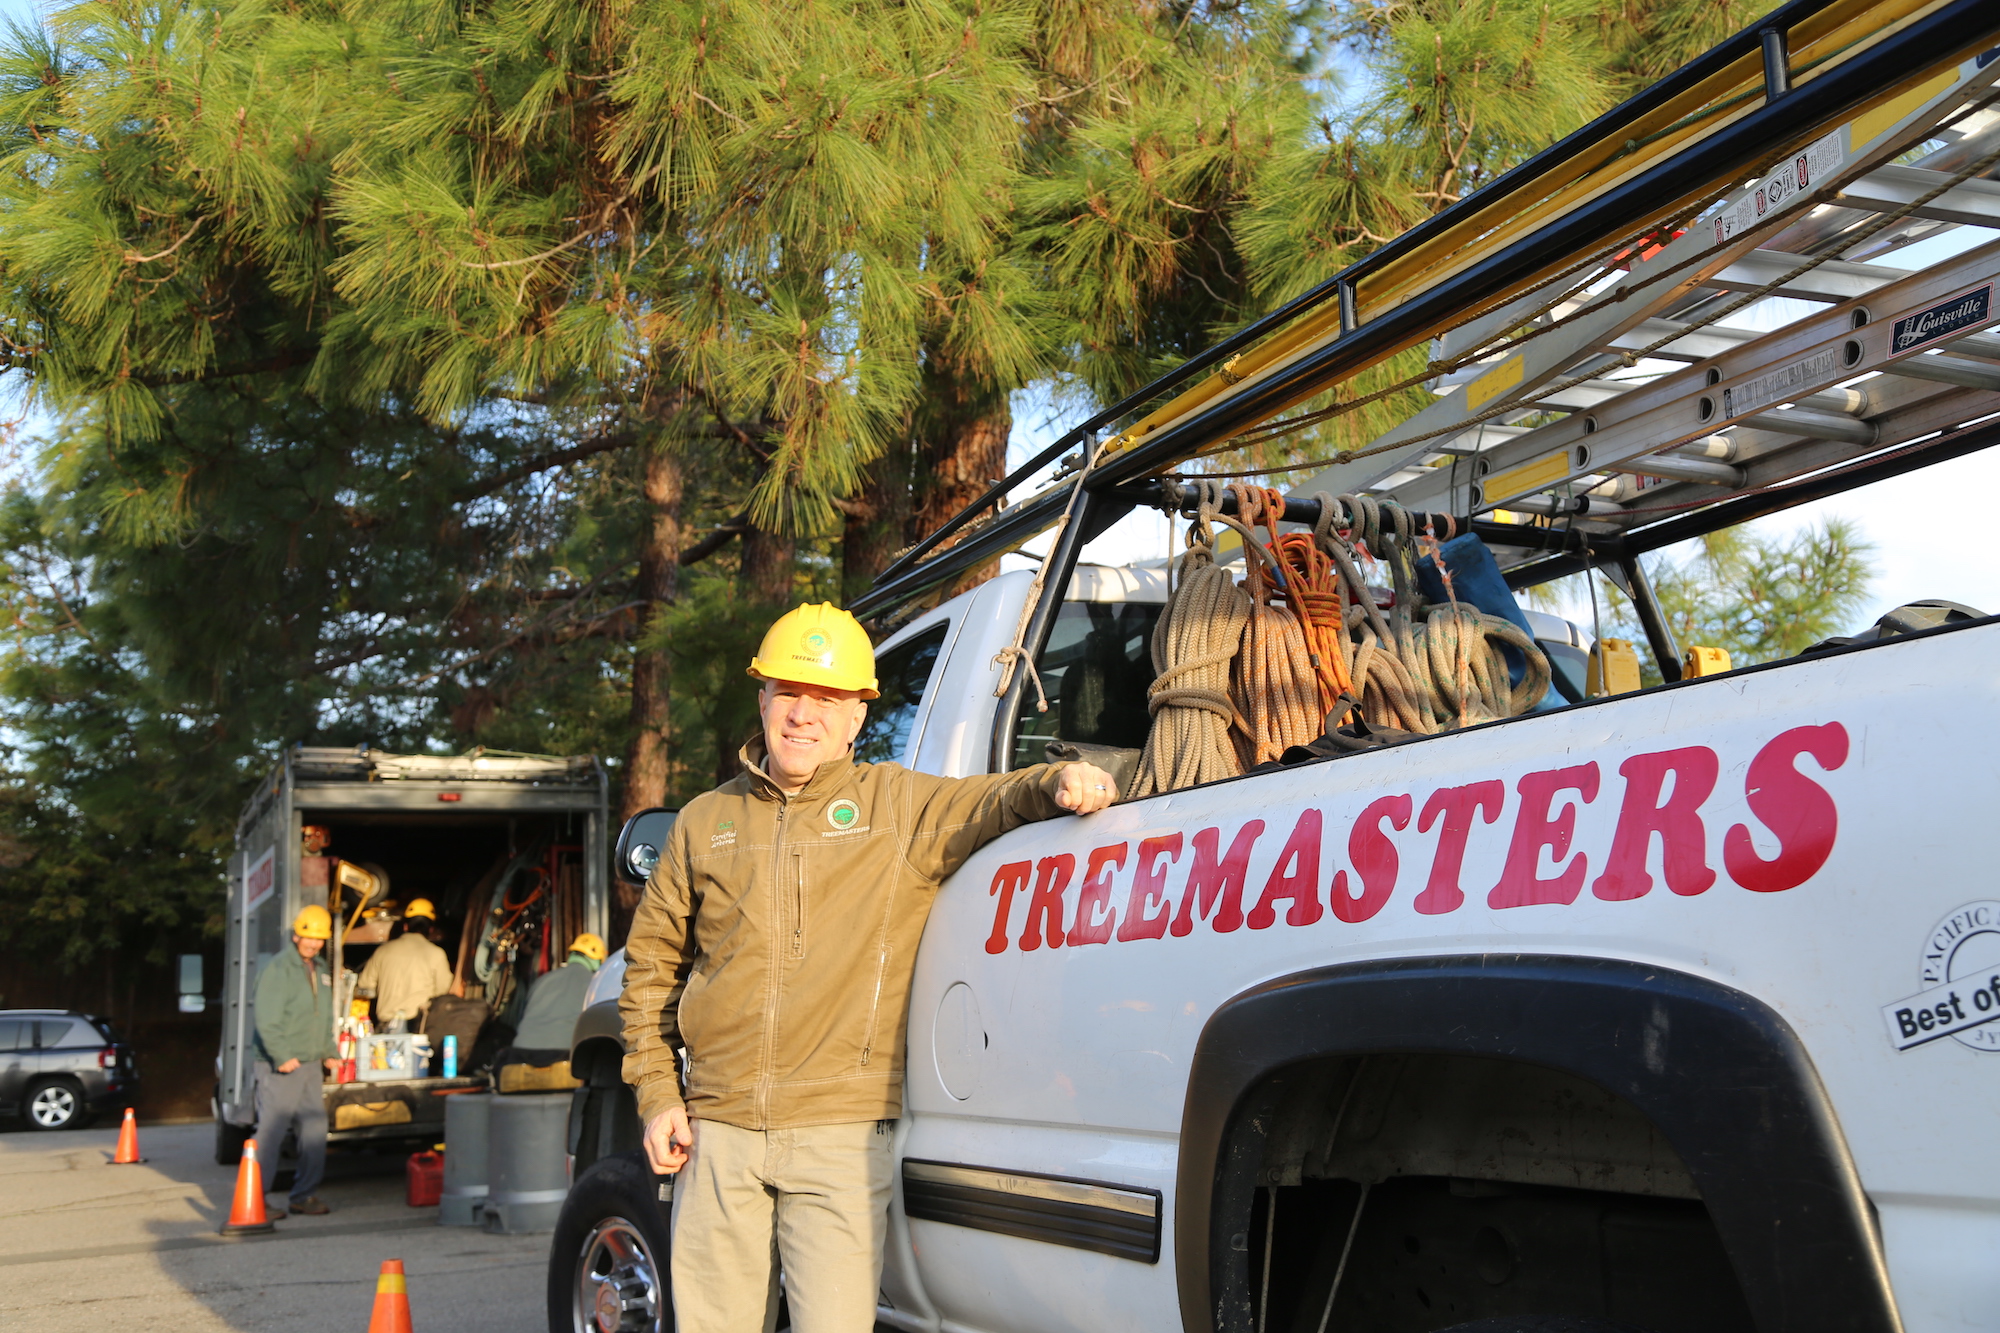 From Those Who Know: Treemasters Tree Service